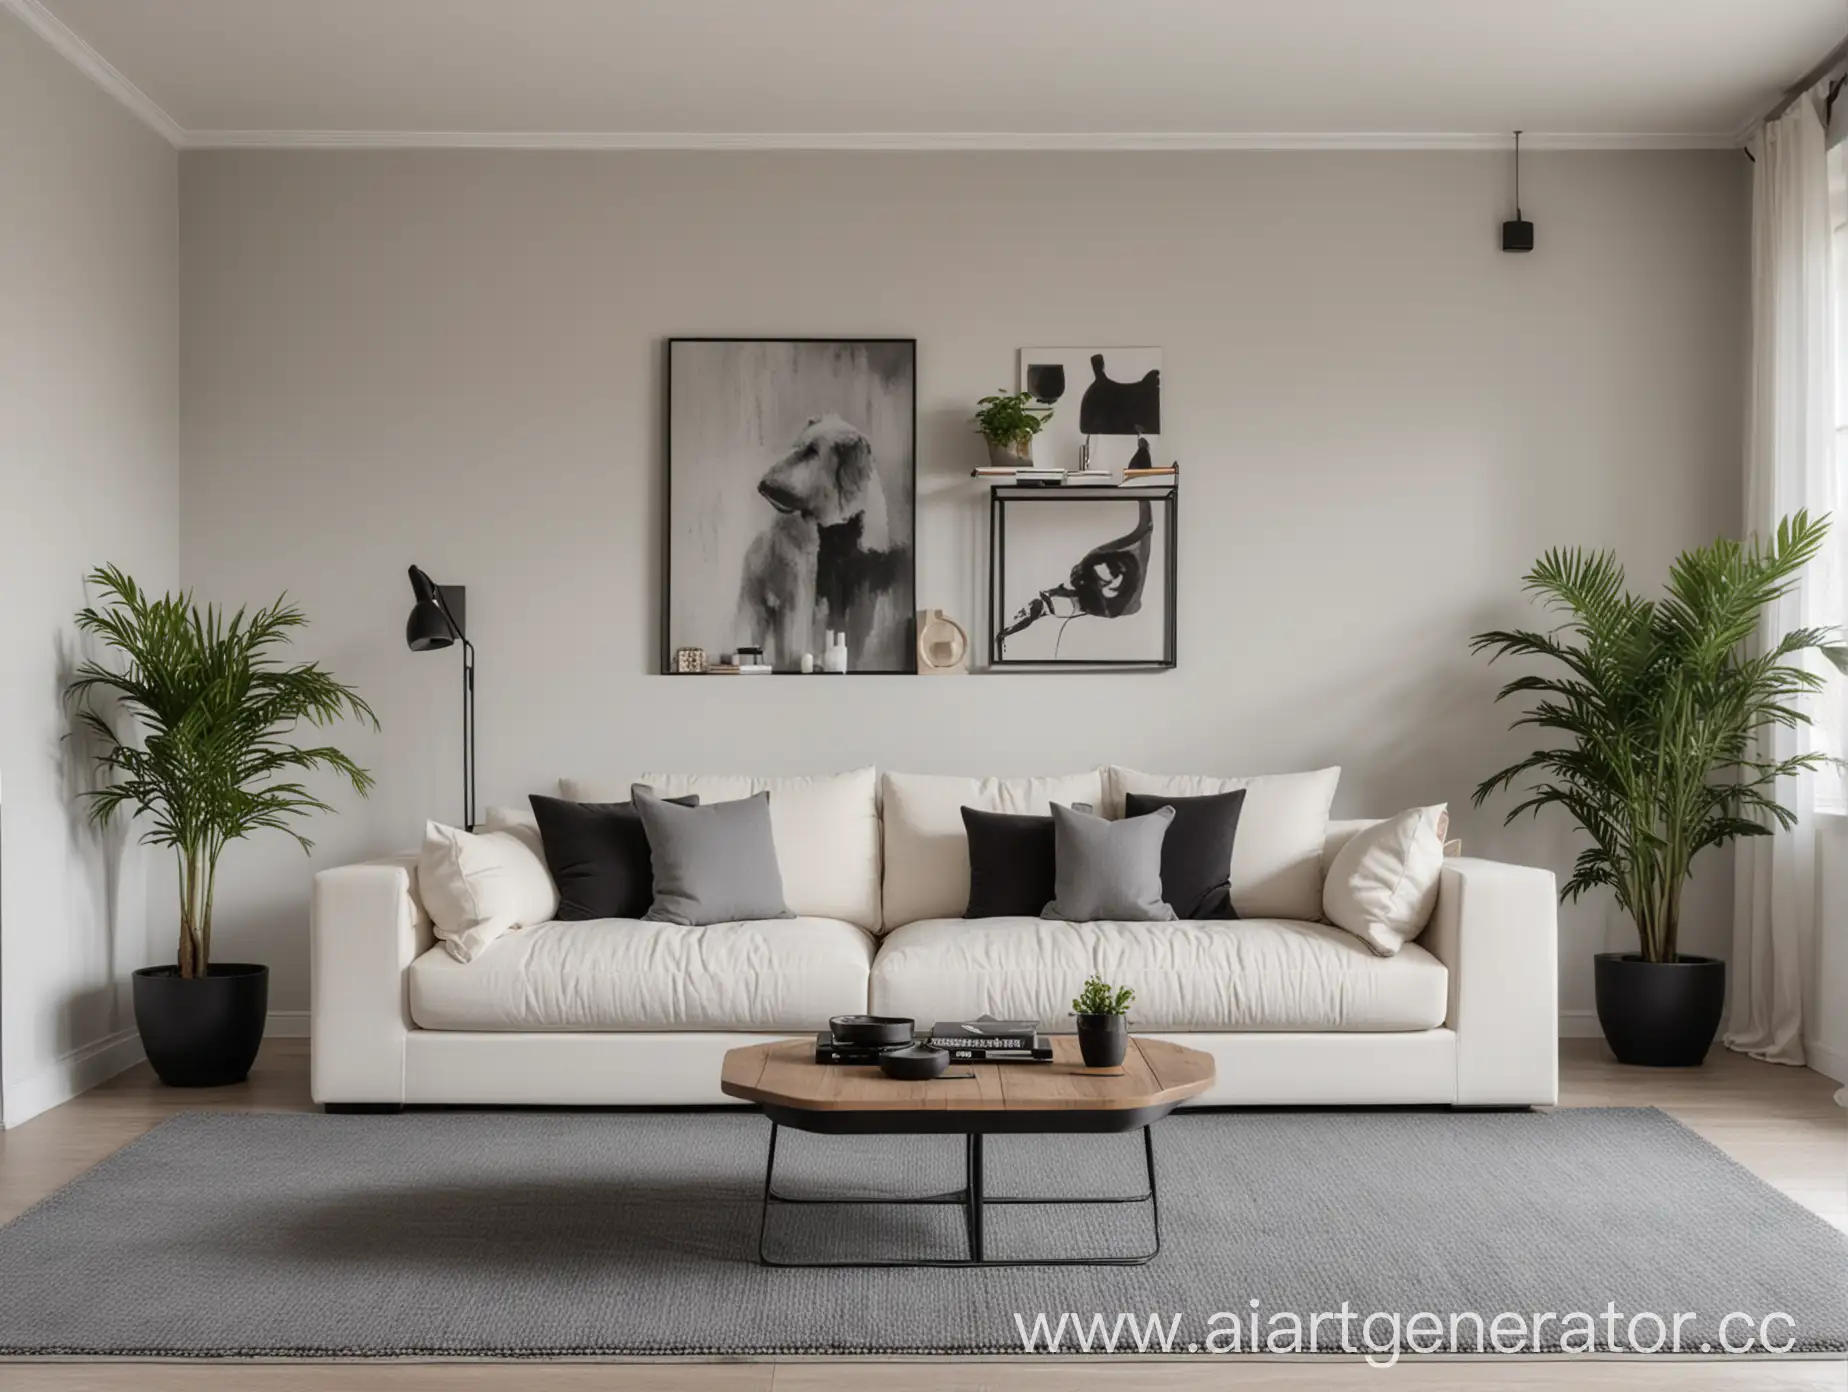 Minimalist-Living-Room-with-White-Sofa-Gray-Accents-and-Beige-Art